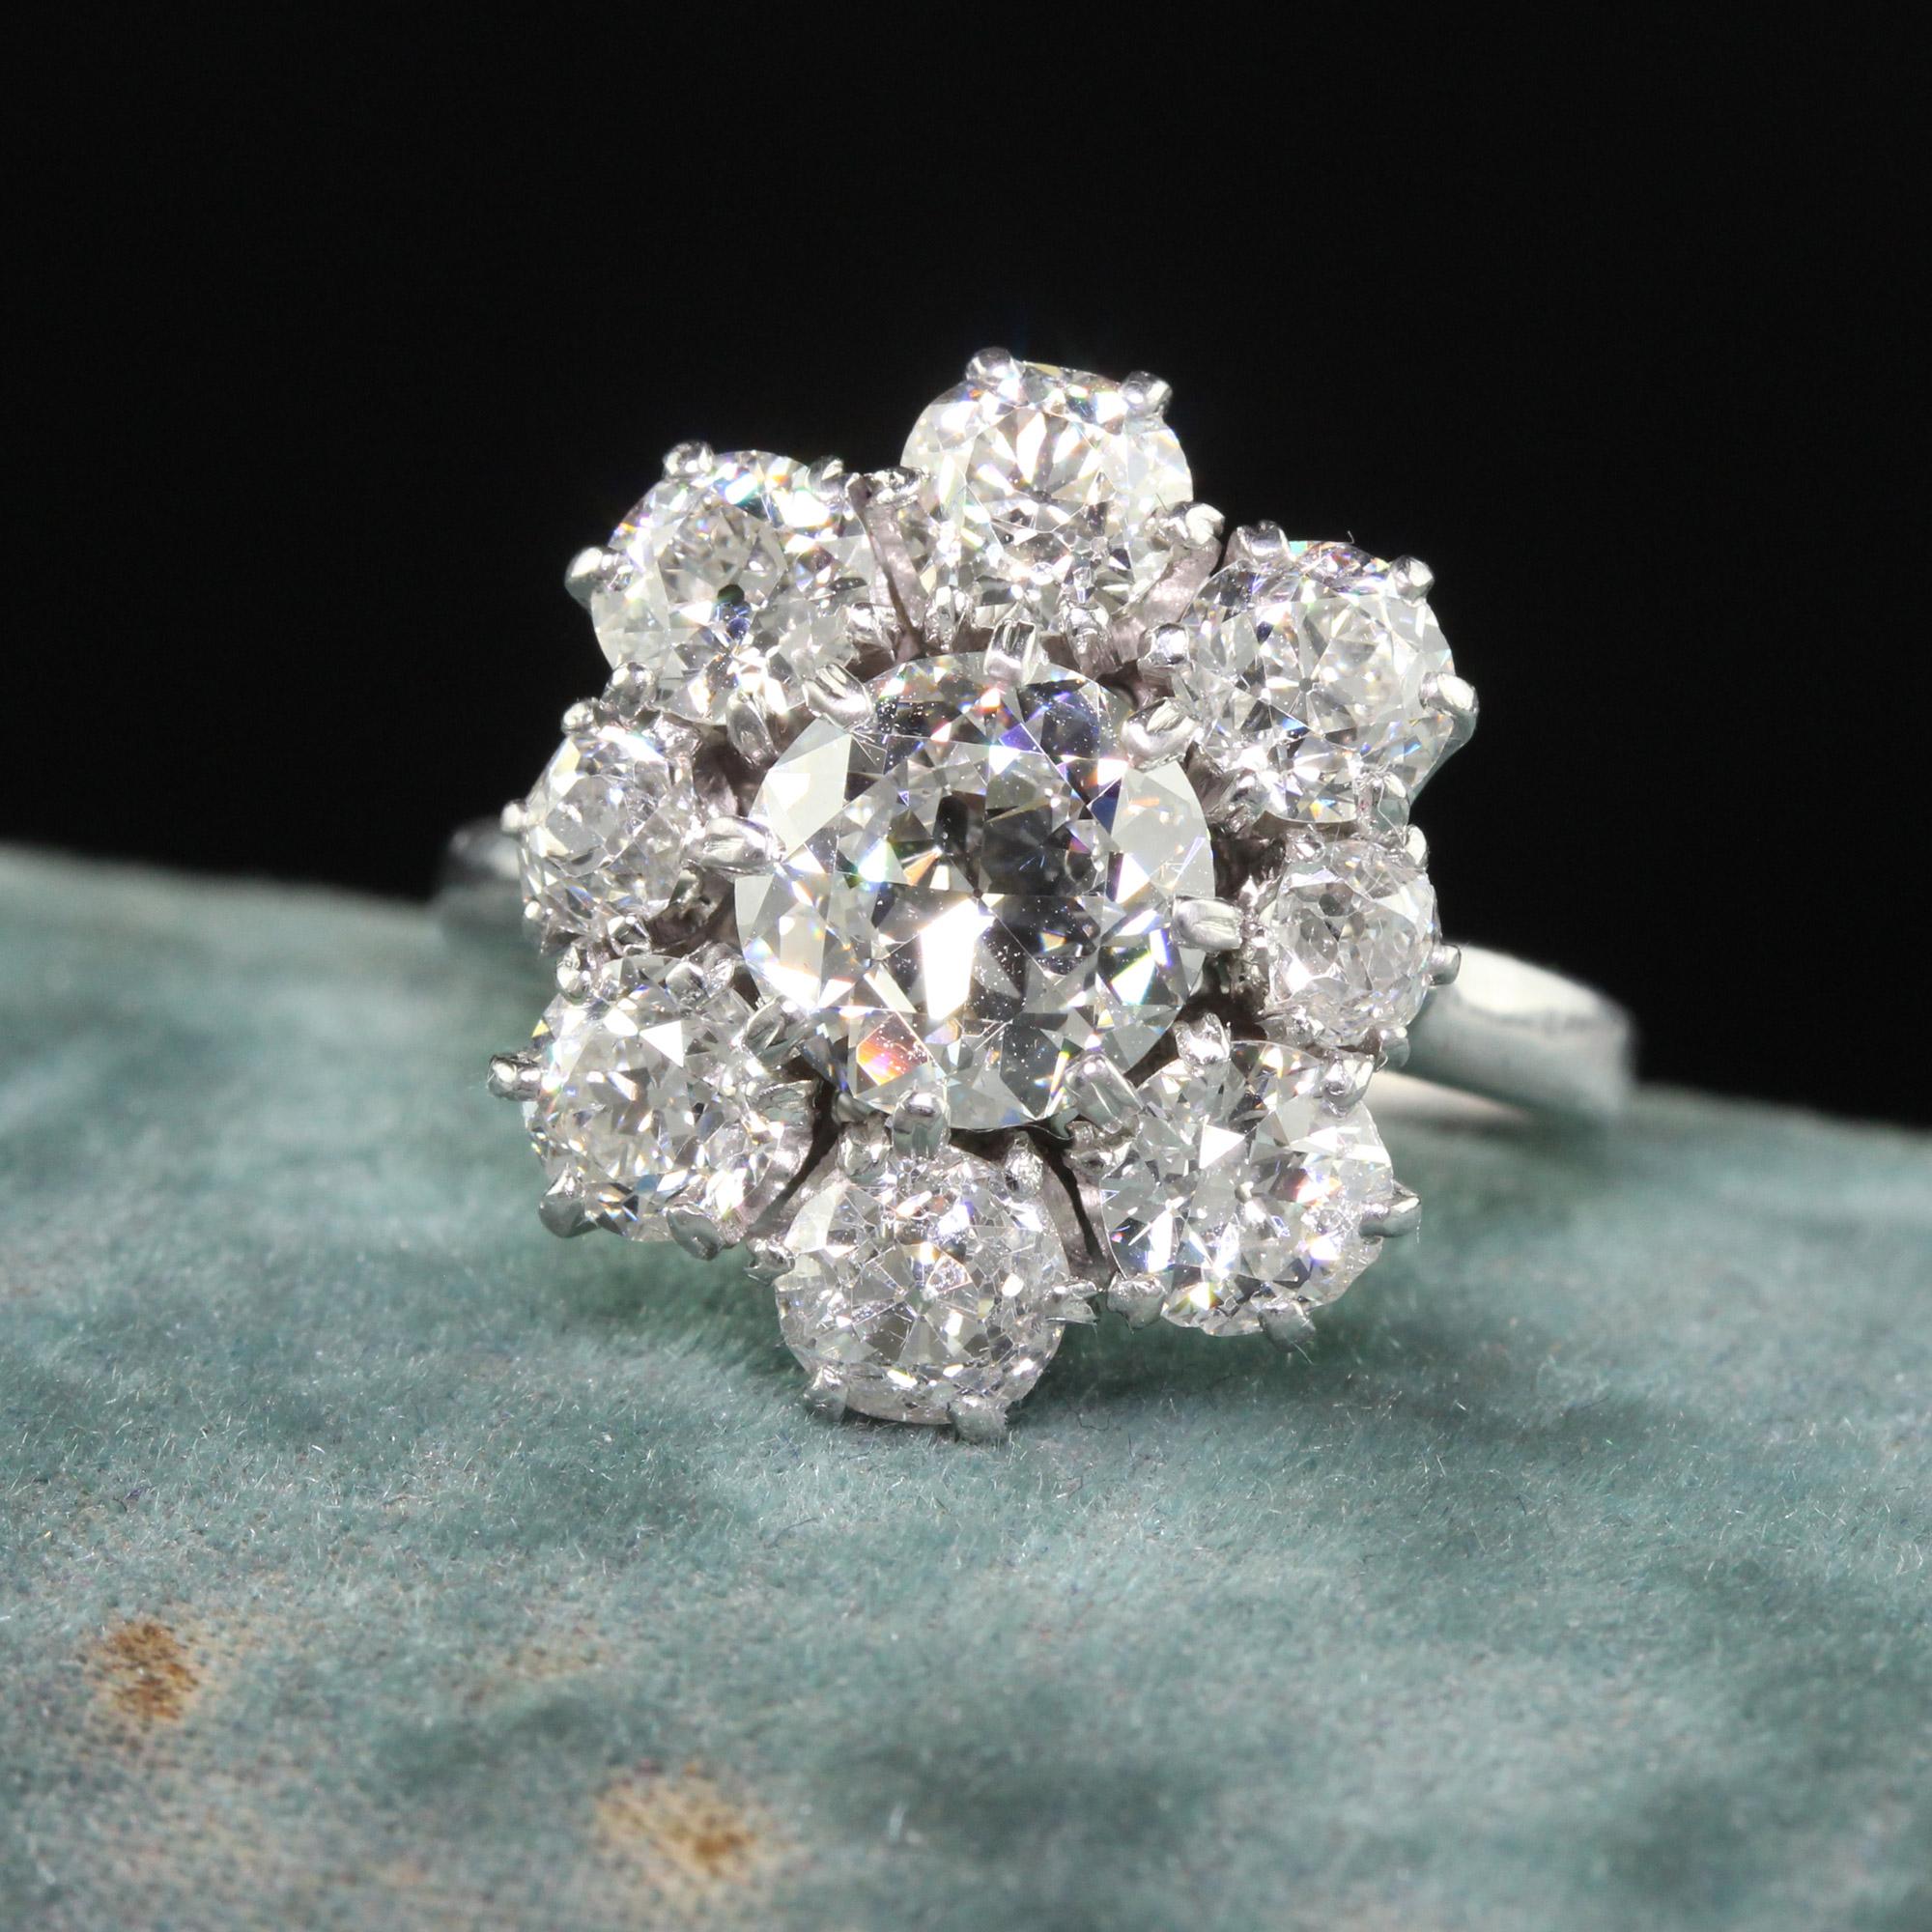 Beautiful Vintage Estate French 18K White Gold Old Cut Diamond Engagement Ring - GIA. This beautiful engagement ring is crafted in 18k white gold. The center holds a beautiful transition cut diamond that has a GIA report. The center diamond is